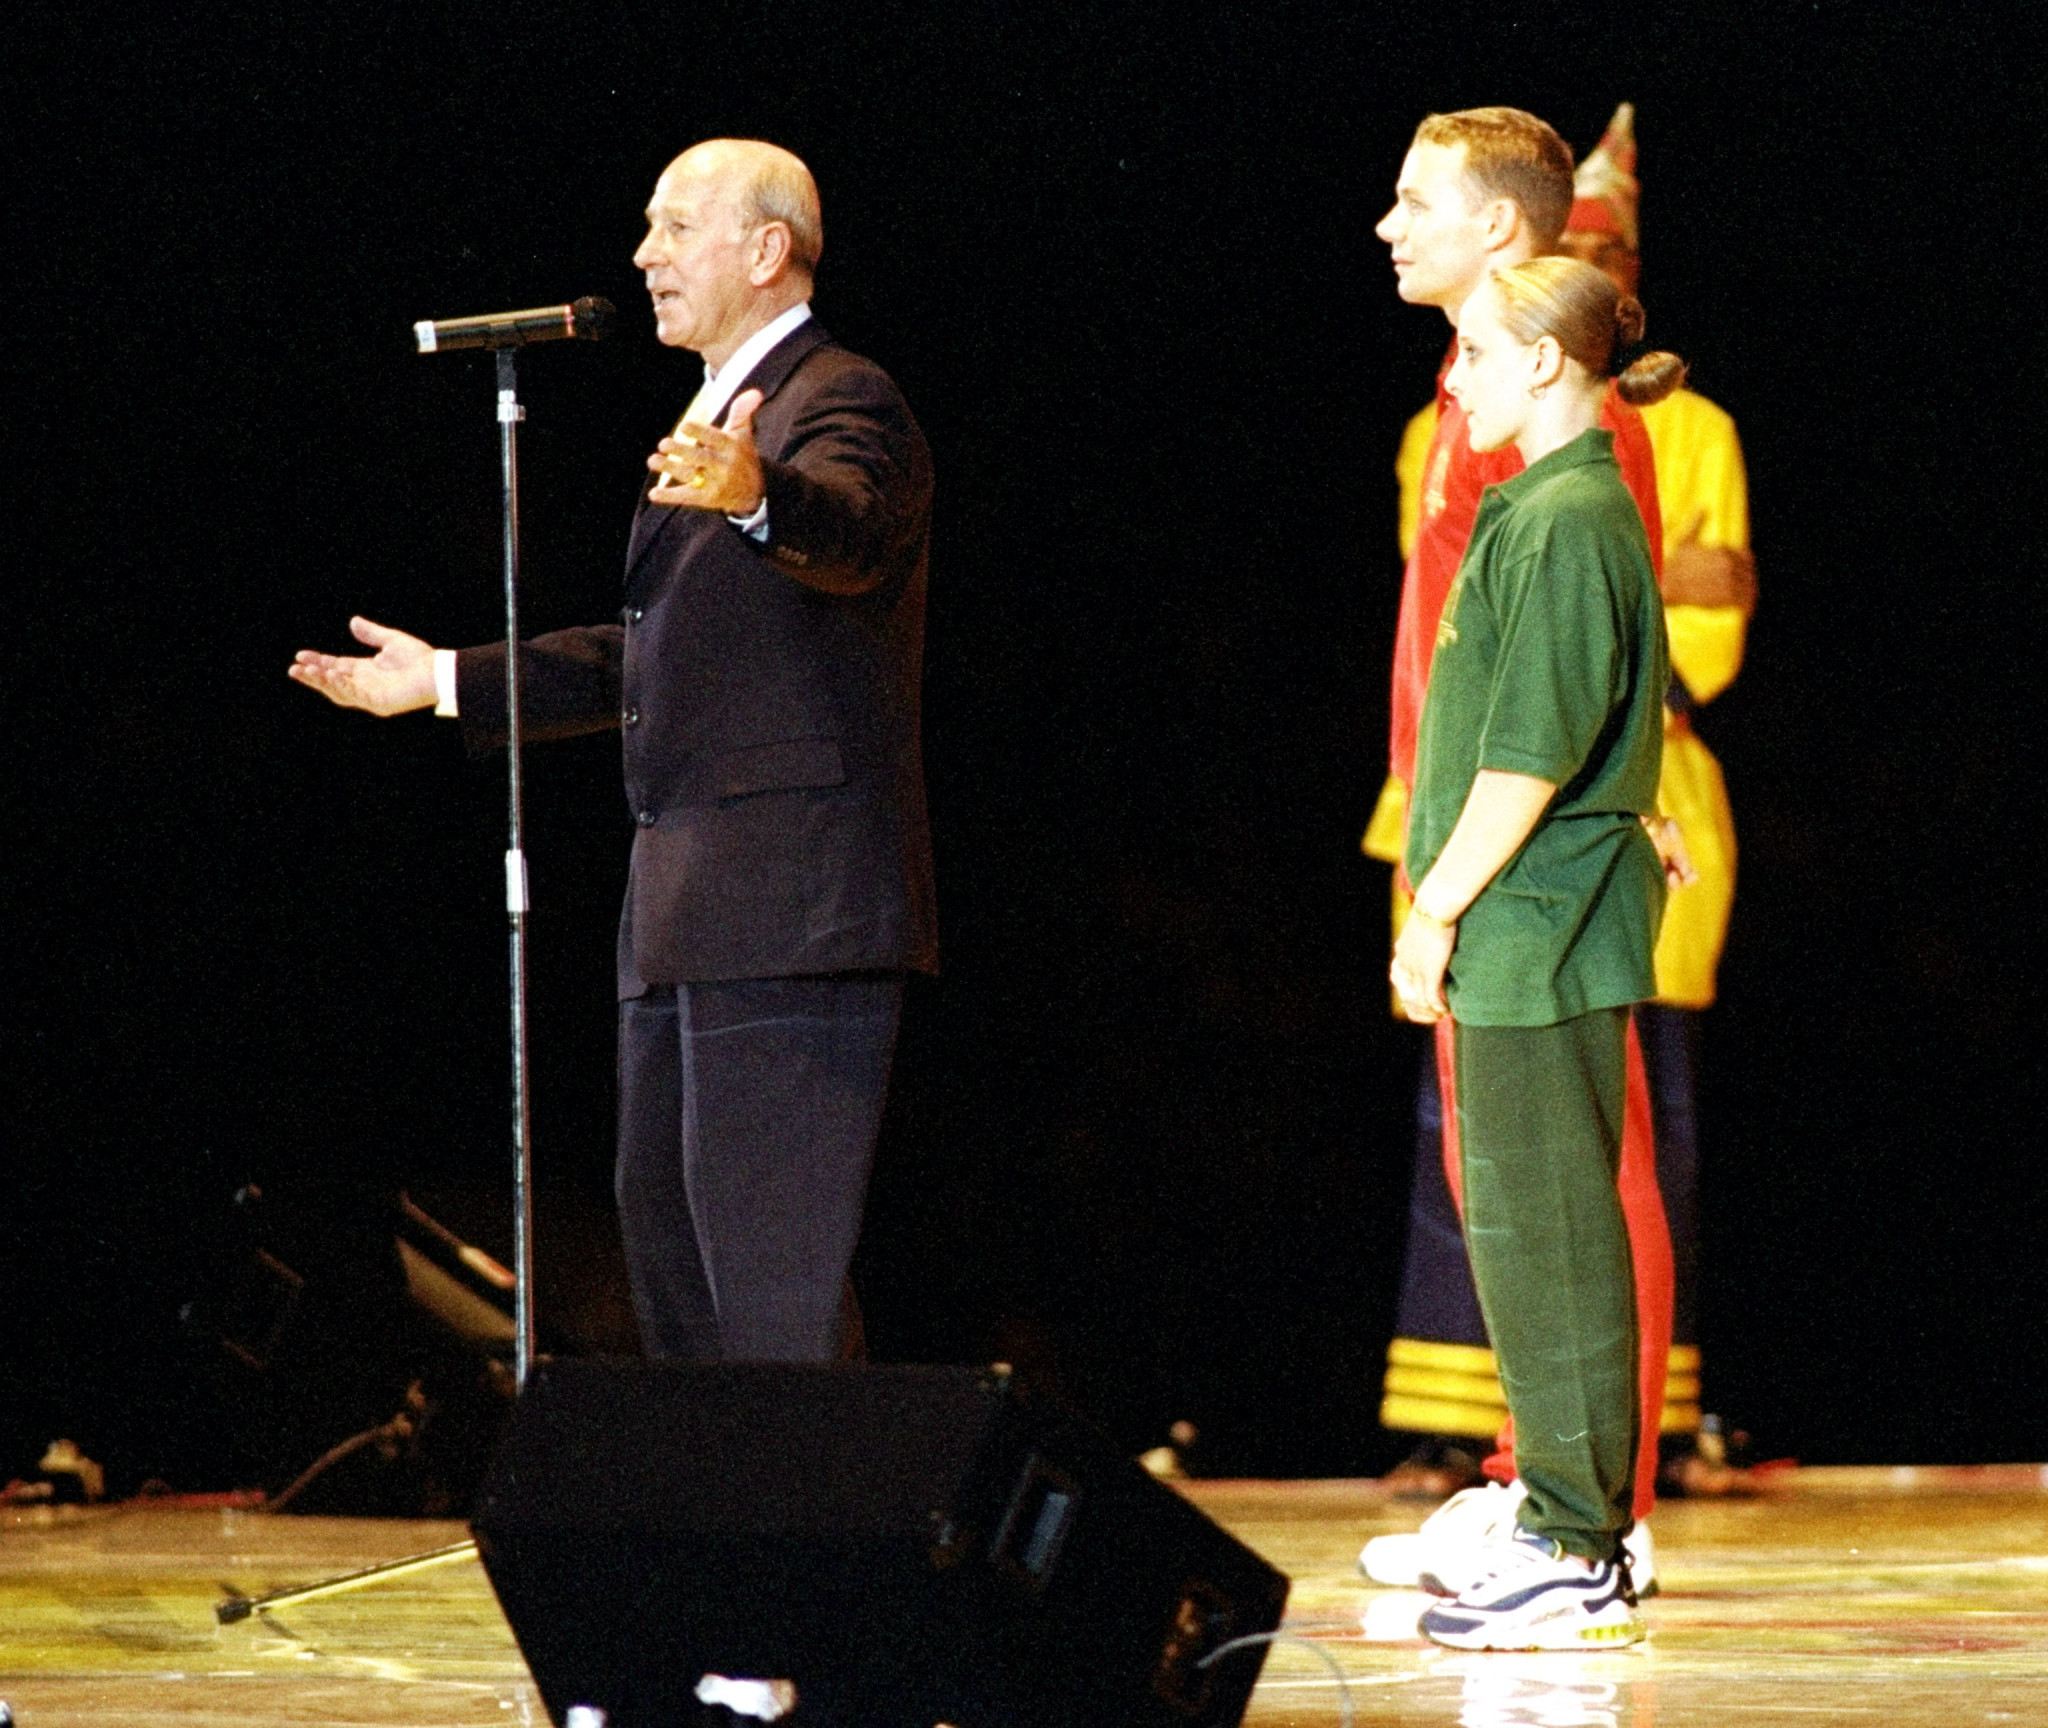 Manchester United legend Sir Bobby Charlton was involved in the Closing Ceremony of the 1998 Commonwealth Games in Kuala Lumpur, which included a video link-up to the city in England ©Getty Images